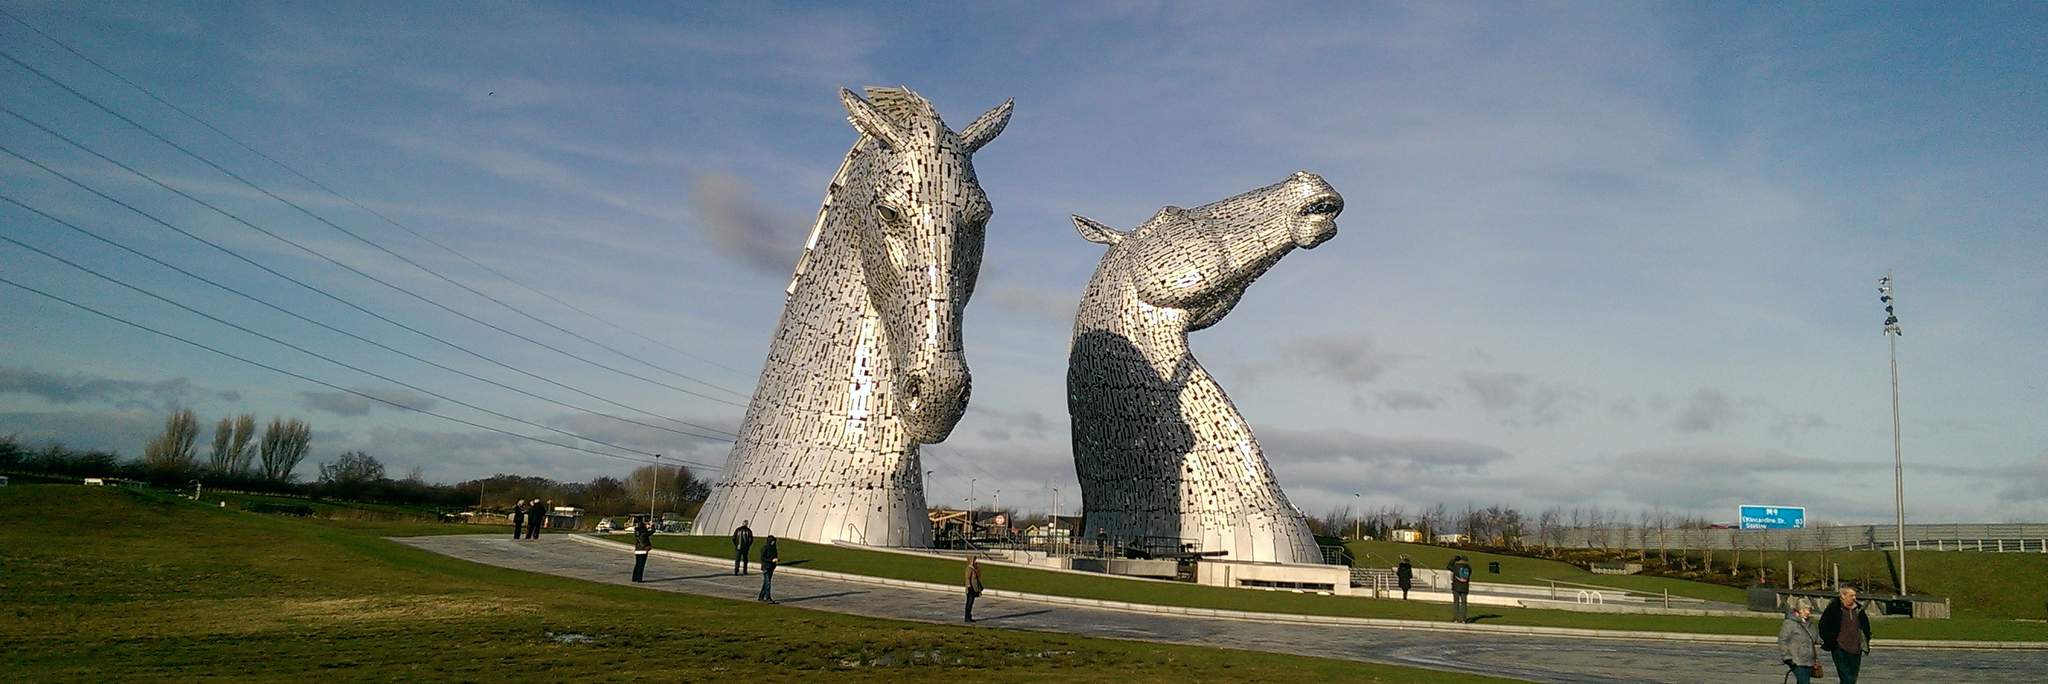 Attractions in Scotland